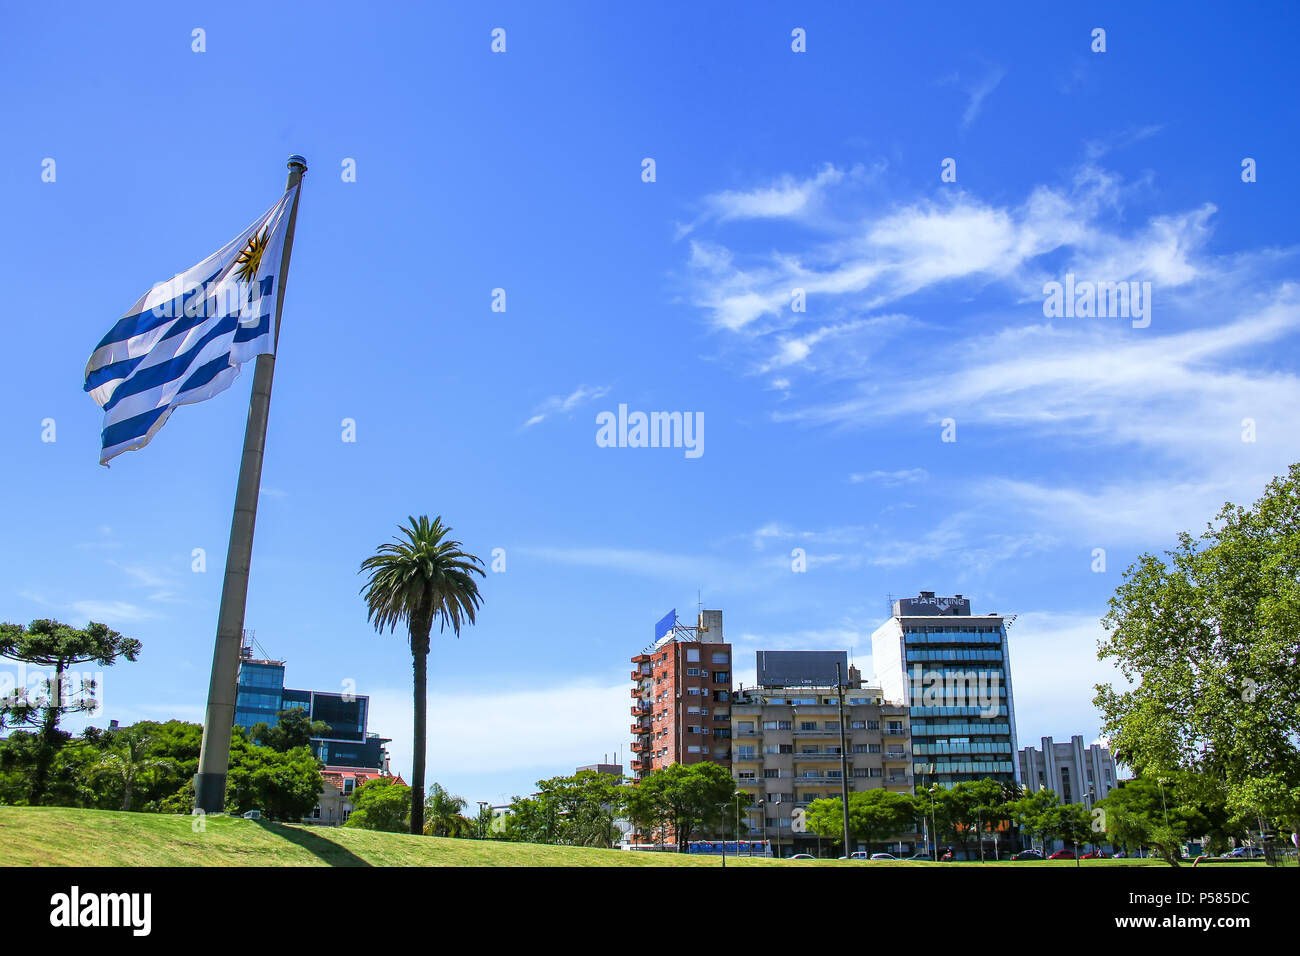 National flag of Uruguay flying in Tres Cruces district of Montevideo, Uruguay. Montevideo is the capital and largest city of Uruguay. Stock Photo